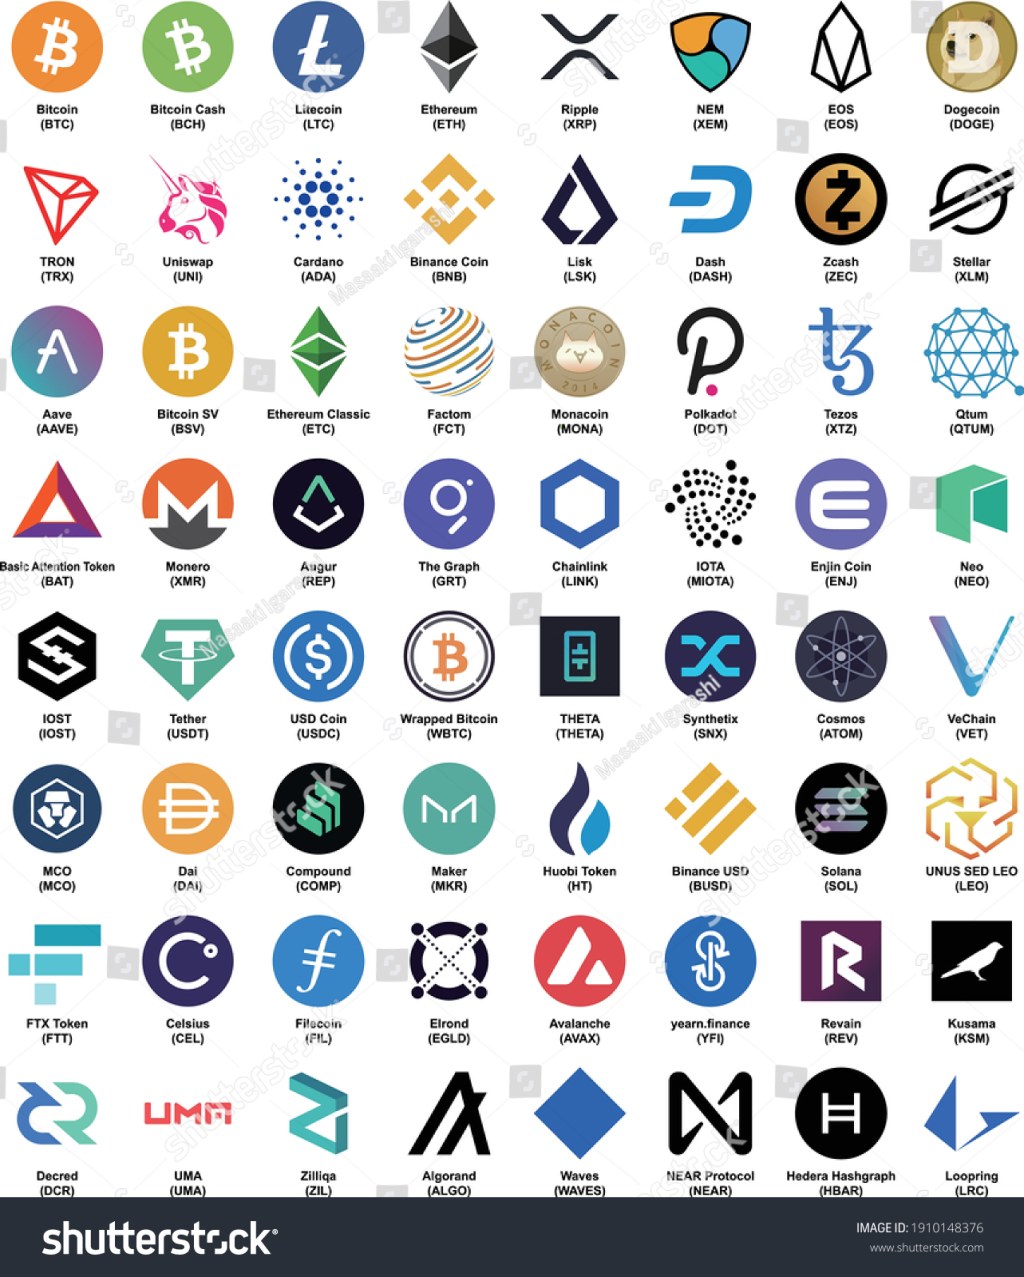 Picture of: , Cryptocurrency Logo Concept Images, Stock Photos & Vectors